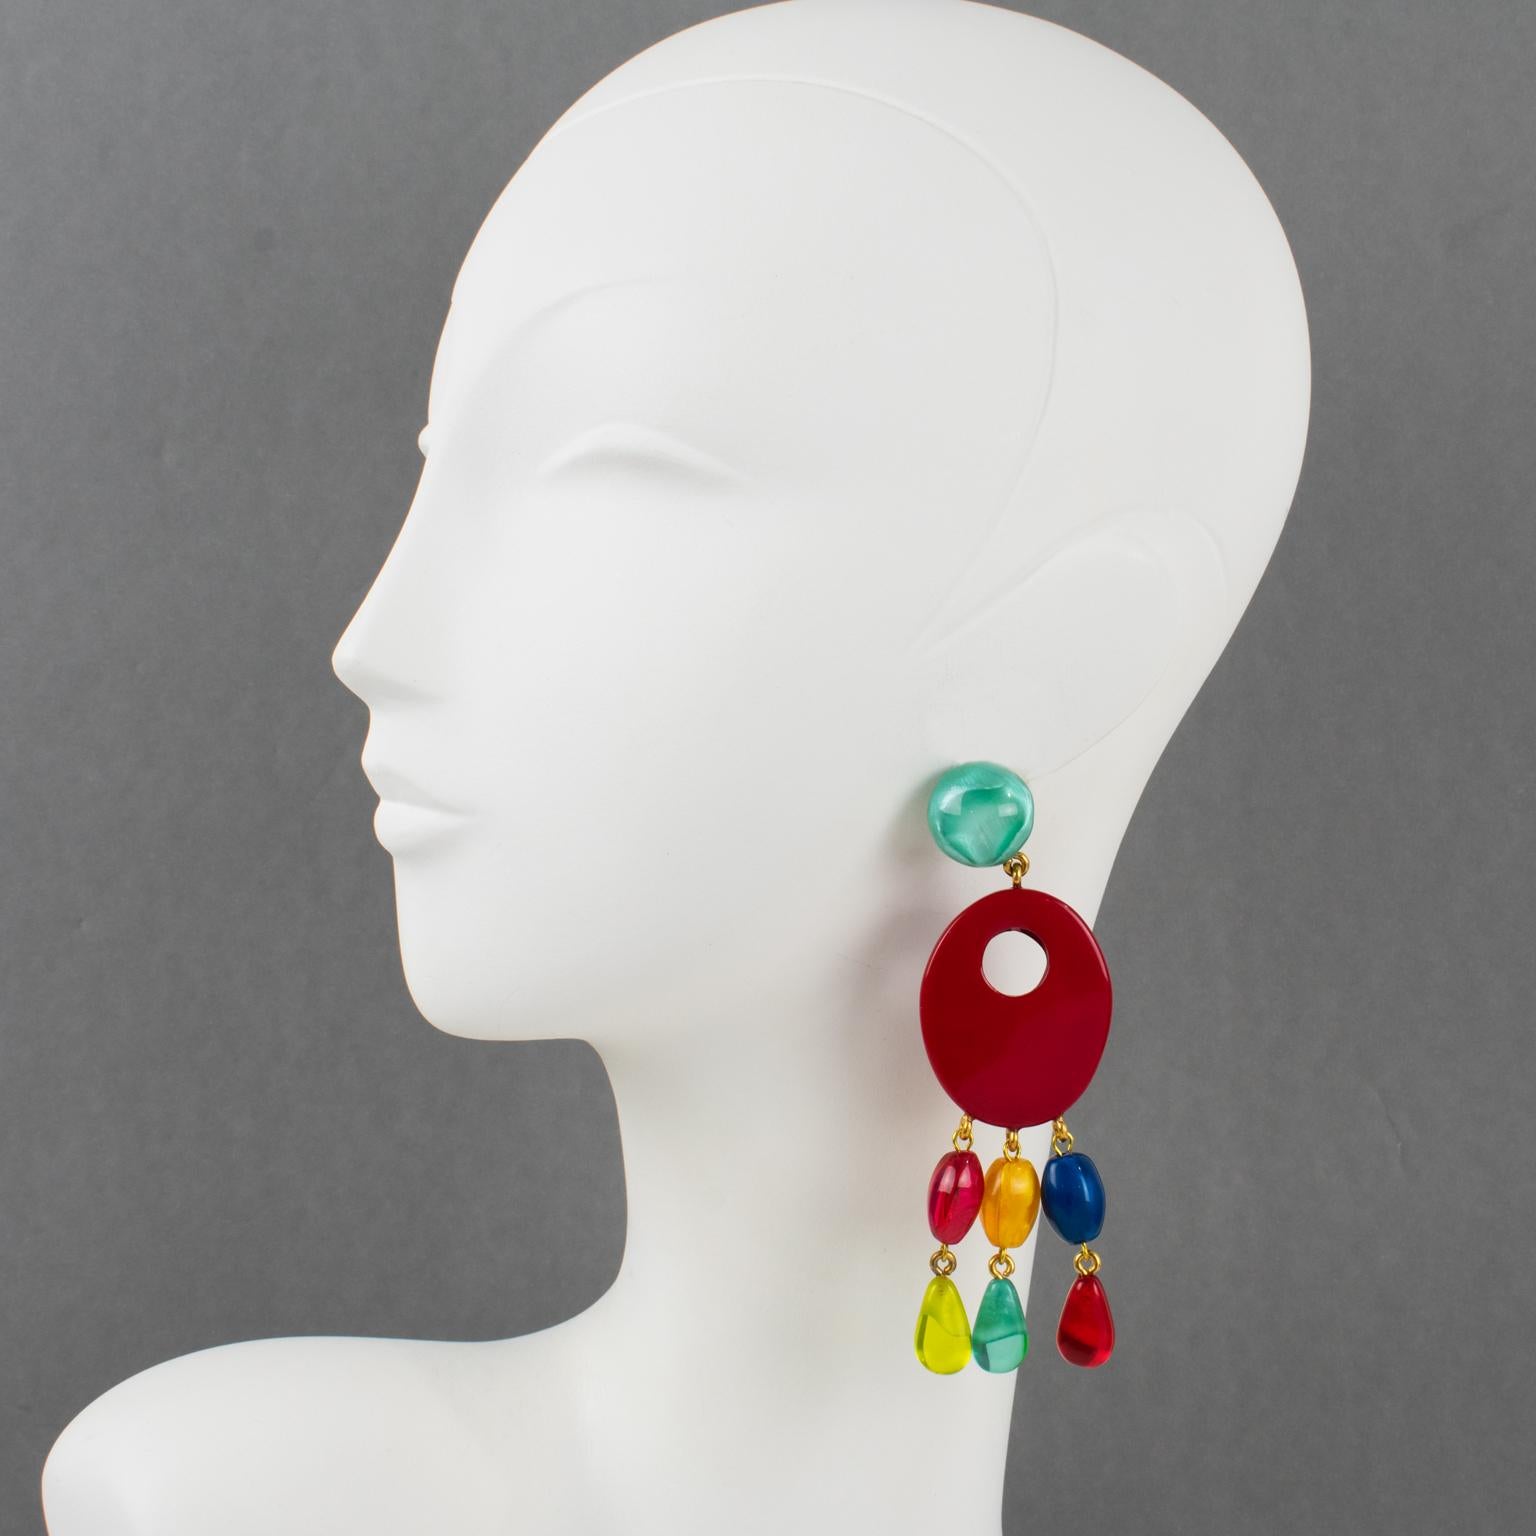 These stunning oversized pierced earrings by Dominique Denaive Paris feature a sculptural chandelier dangling shape. The carved and see-thru oval resin elements are embellished with teardrop charms. The solid bright red color contrasts with